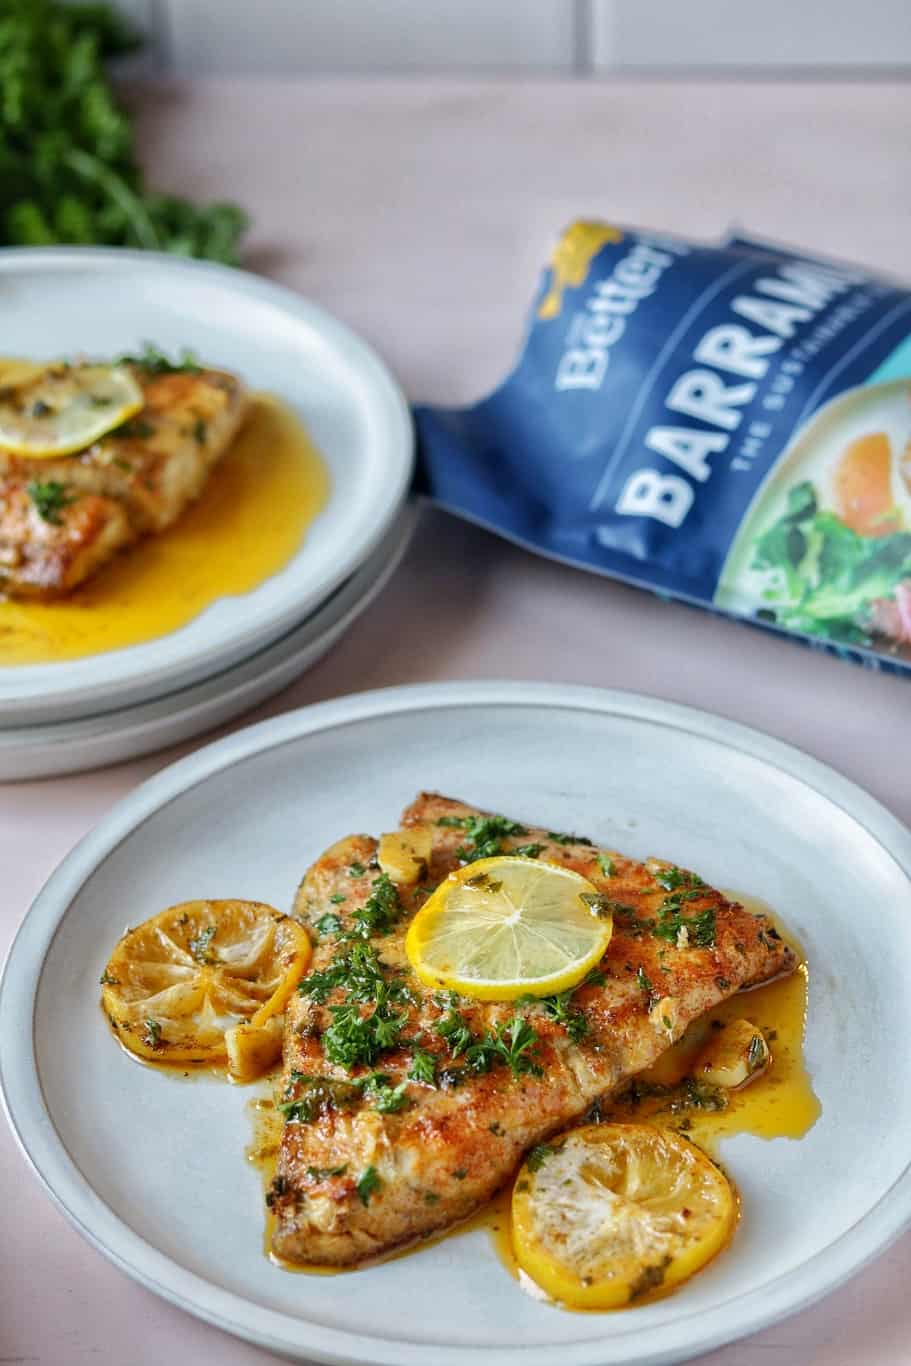 flaky barramundi fillets with crispy skin served with lemon butter sauce, finely chopped parsley, and lemon wedges